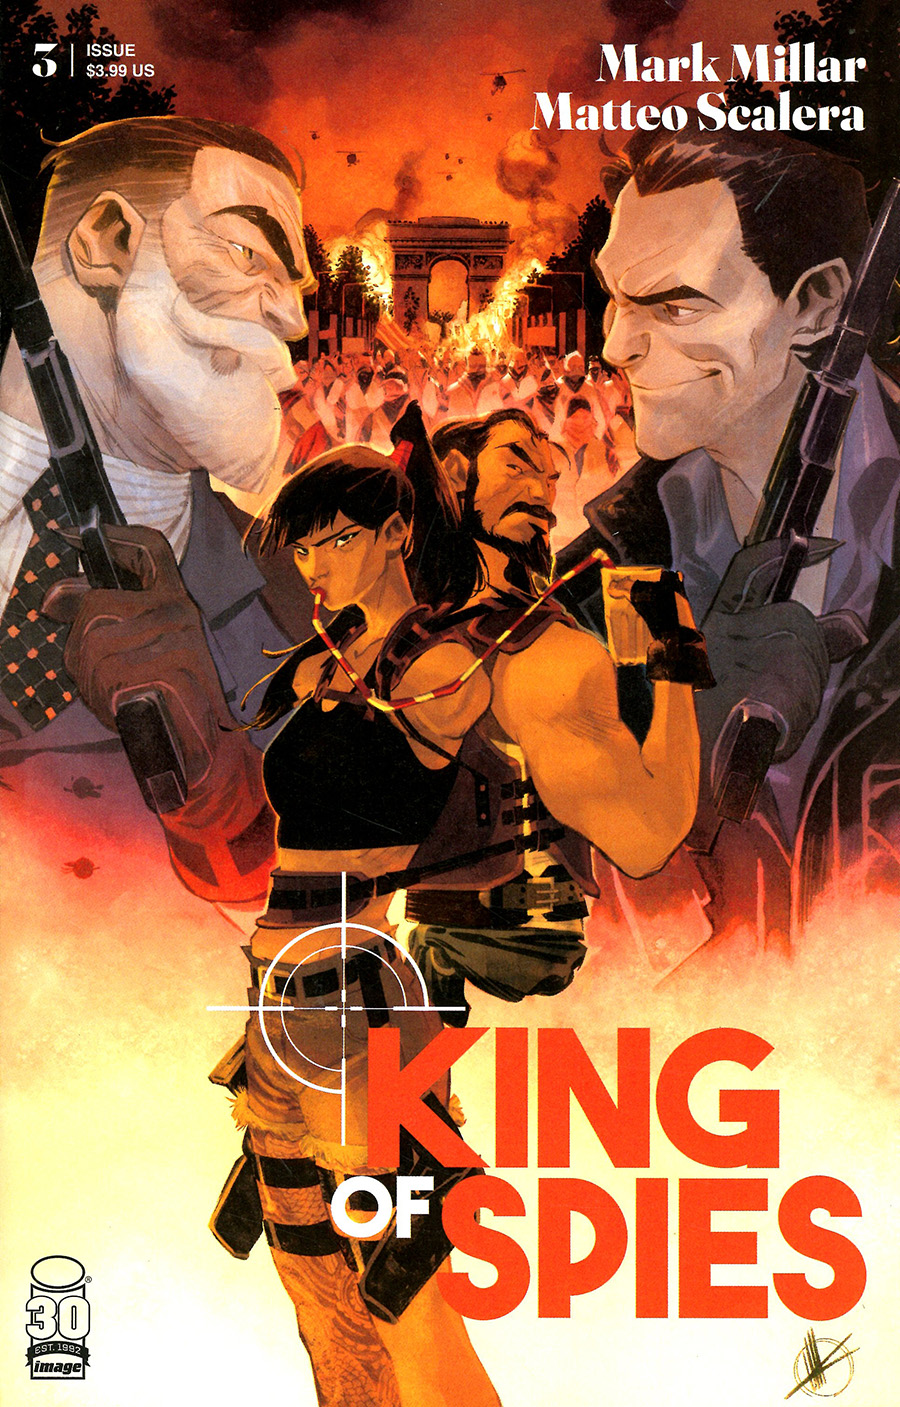 King Of Spies #3 Cover A Regular Matteo Scalera Color Cover